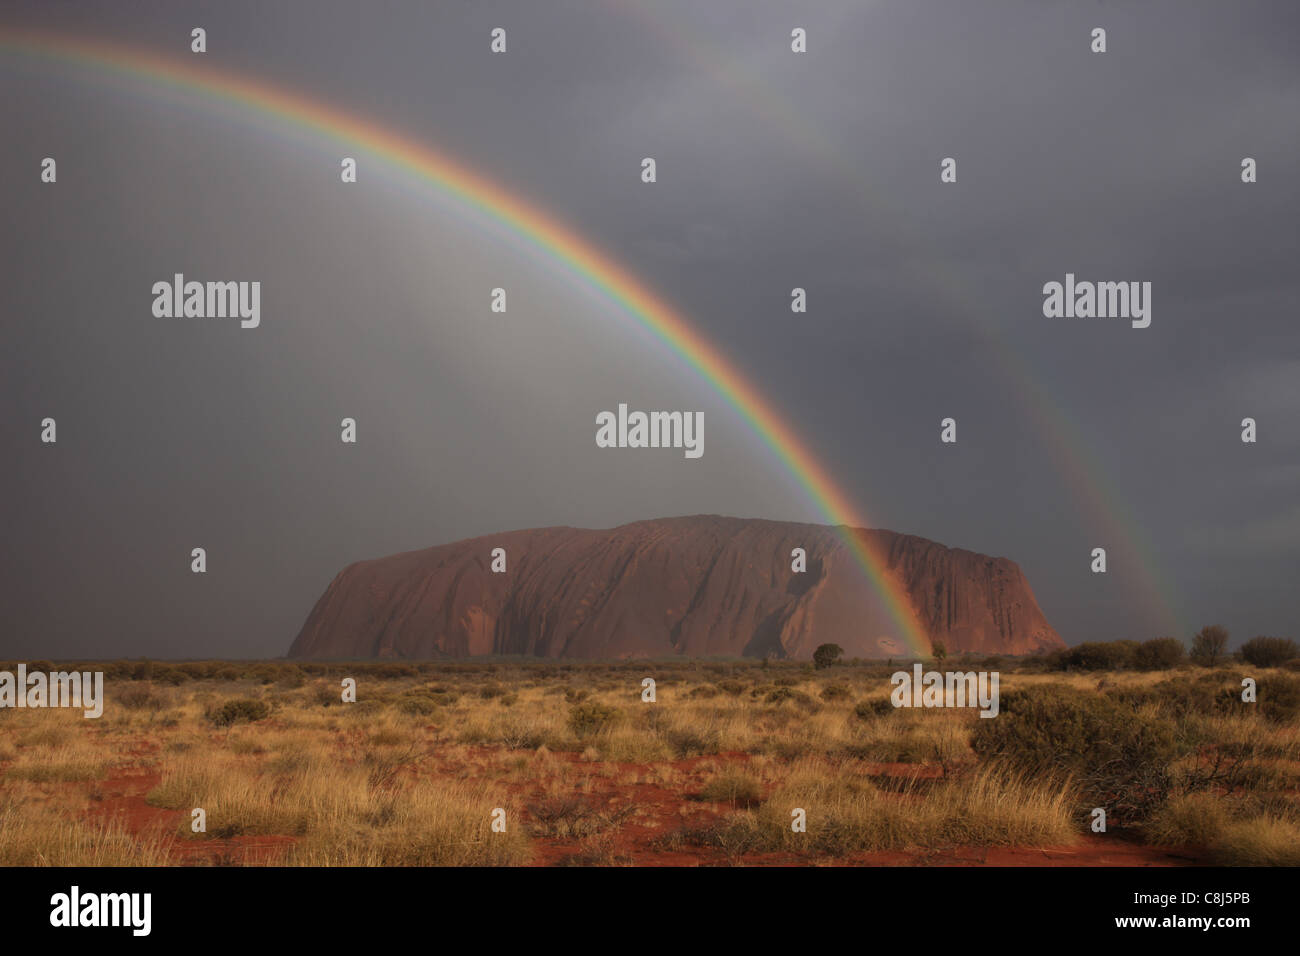 Ayers Rock, Uluru, Australia, Central australia, Outback, red sand, Spinifex, rainbow, clouds, Northern Territory, desert, Red C Stock Photo